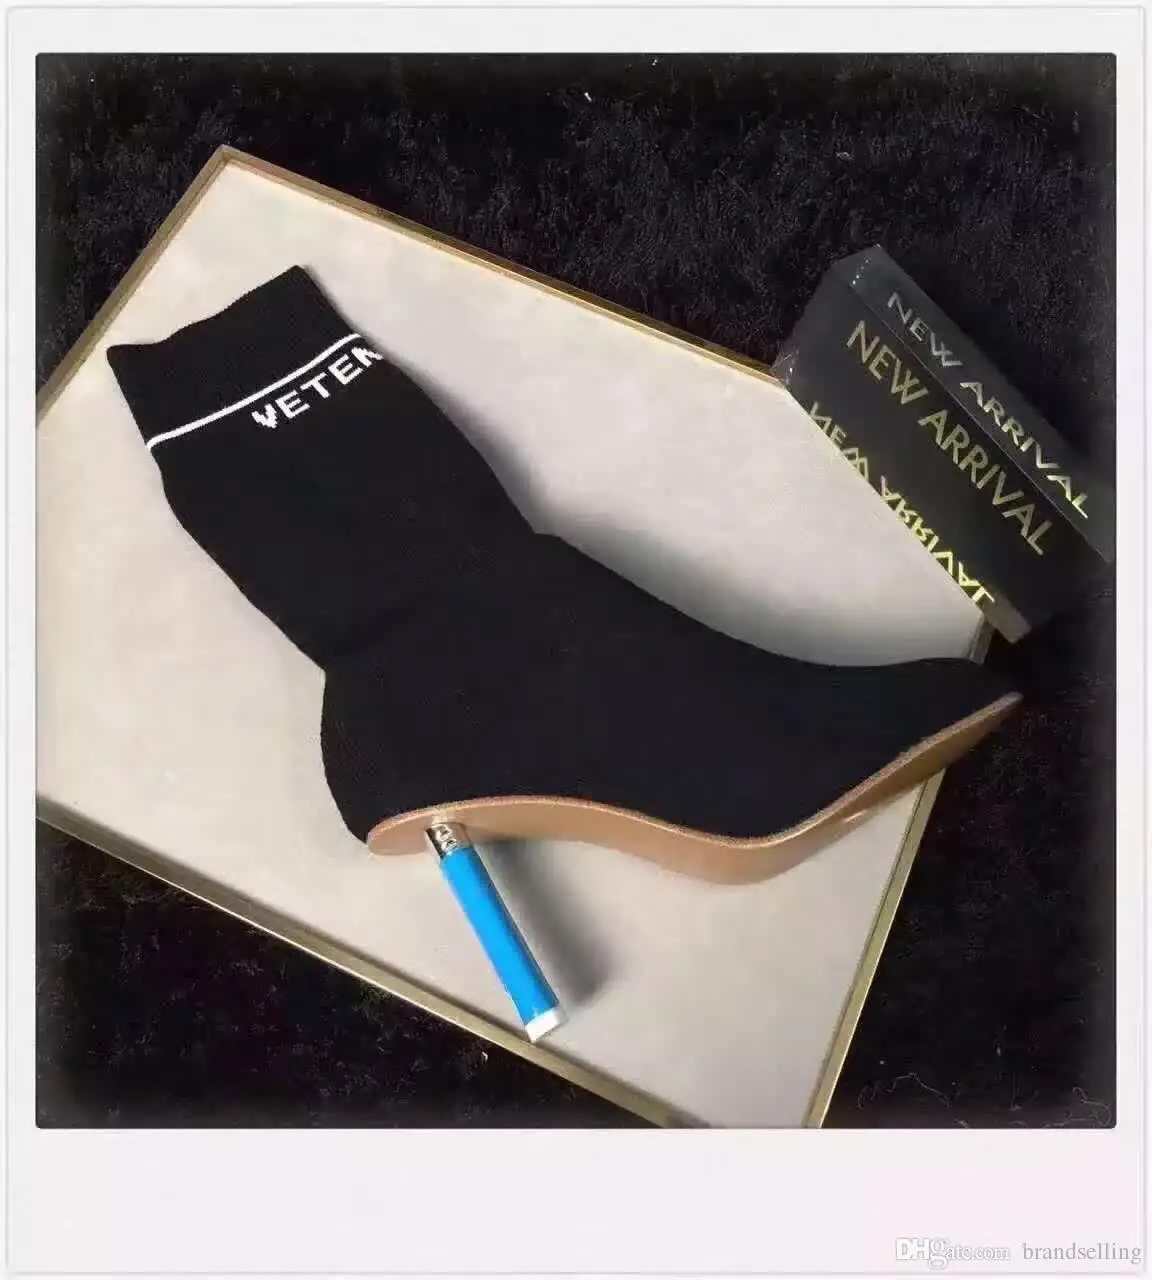 Newly-Introduced Boots Come With a Bottle Opener in The Heels! Fashionable  Footwear Wins All Praises (View Pics) | 👗 LatestLY